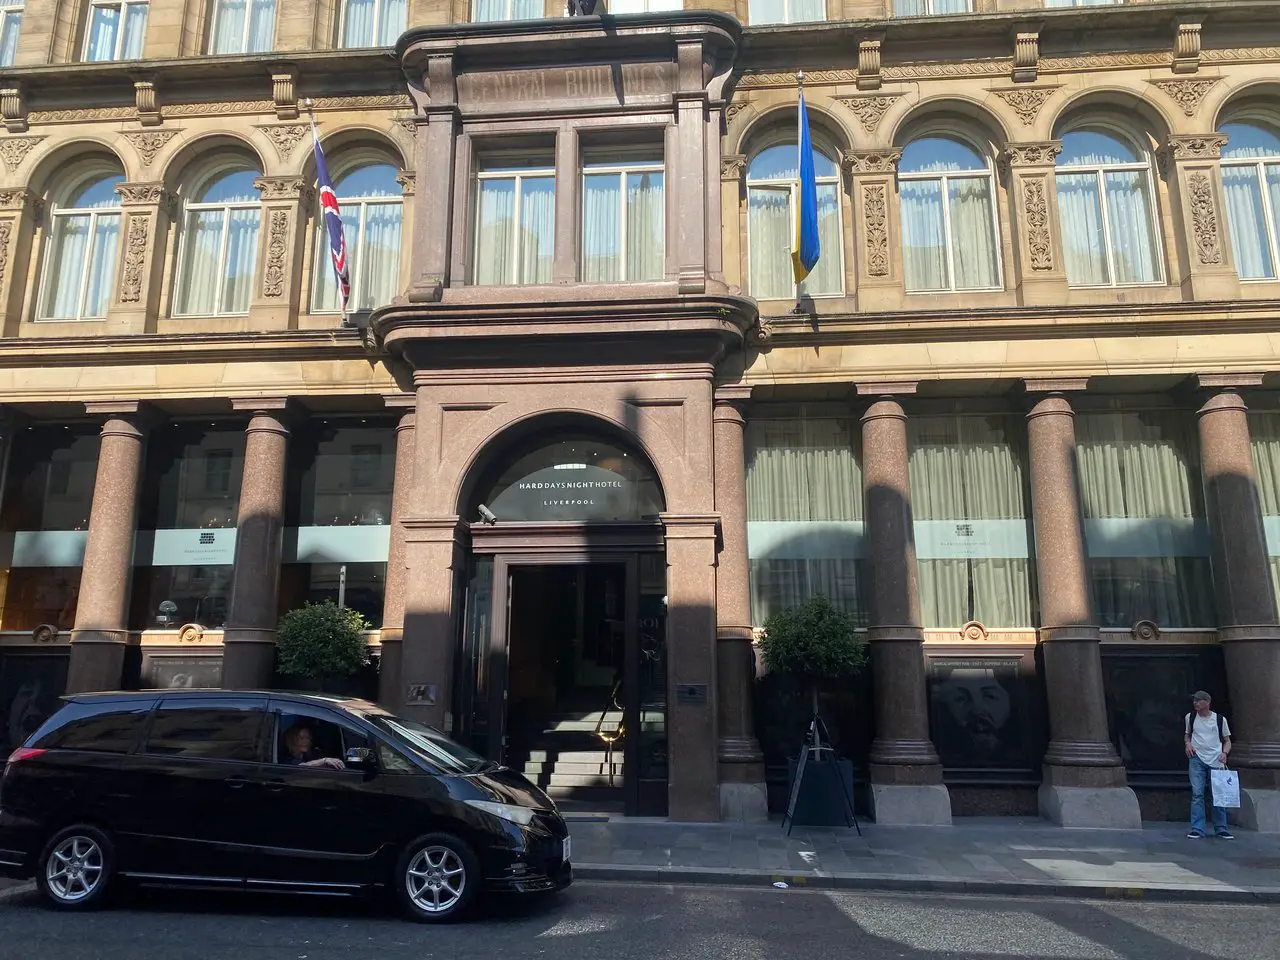 Exterior of the Hard Days Night Hotel in liverpool